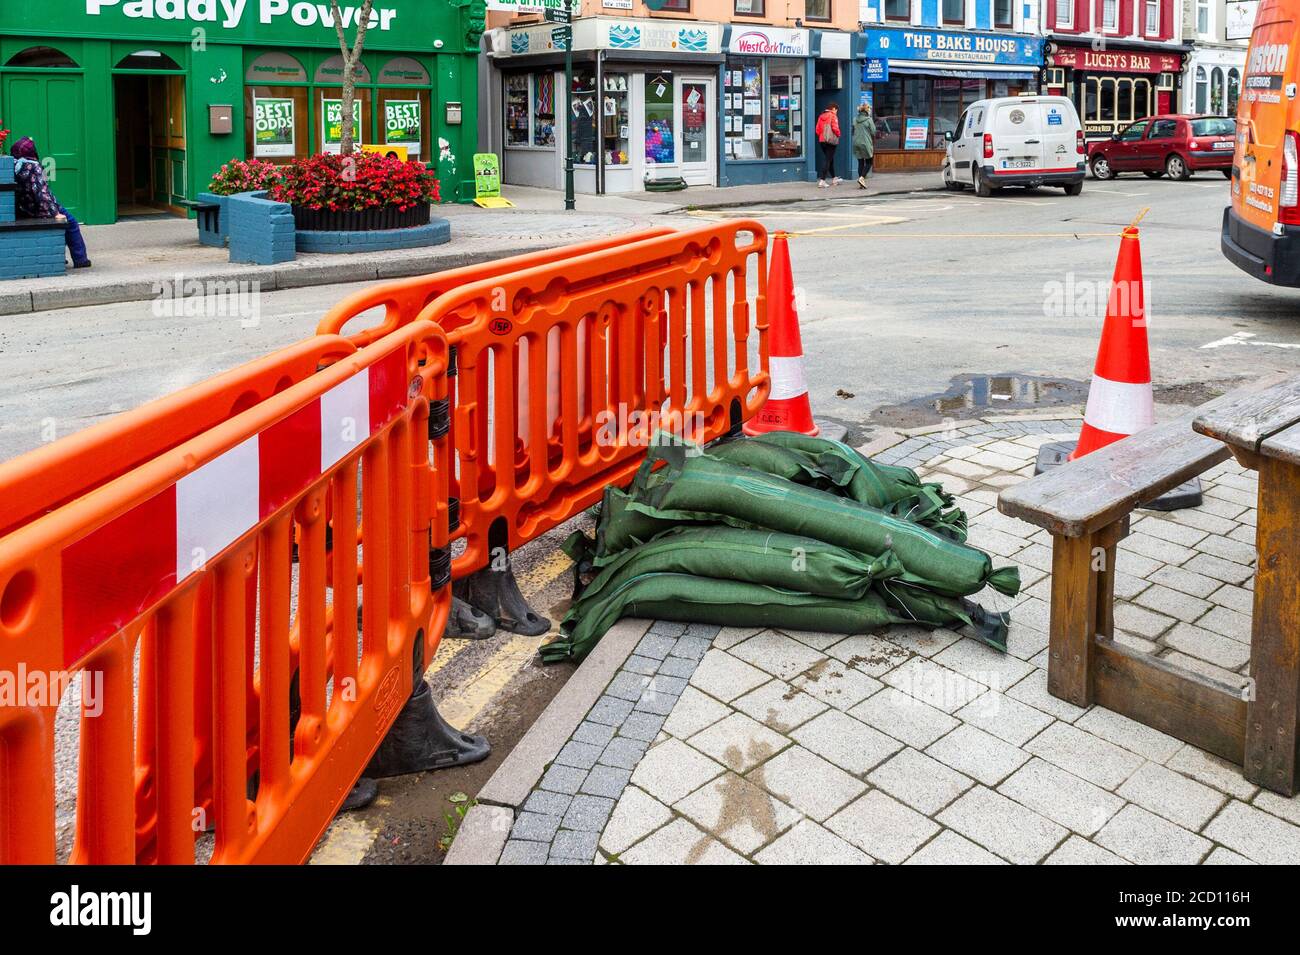 Bantry, West Cork, Ireland. 25th Aug, 2020. Bantry town was the victim of major floods last night with at least 50 homes and businesses suffering significant water and mud damage. The floods happened during a 4 hour deluge of rain. Credit: AG News/Alamy Live News Stock Photo